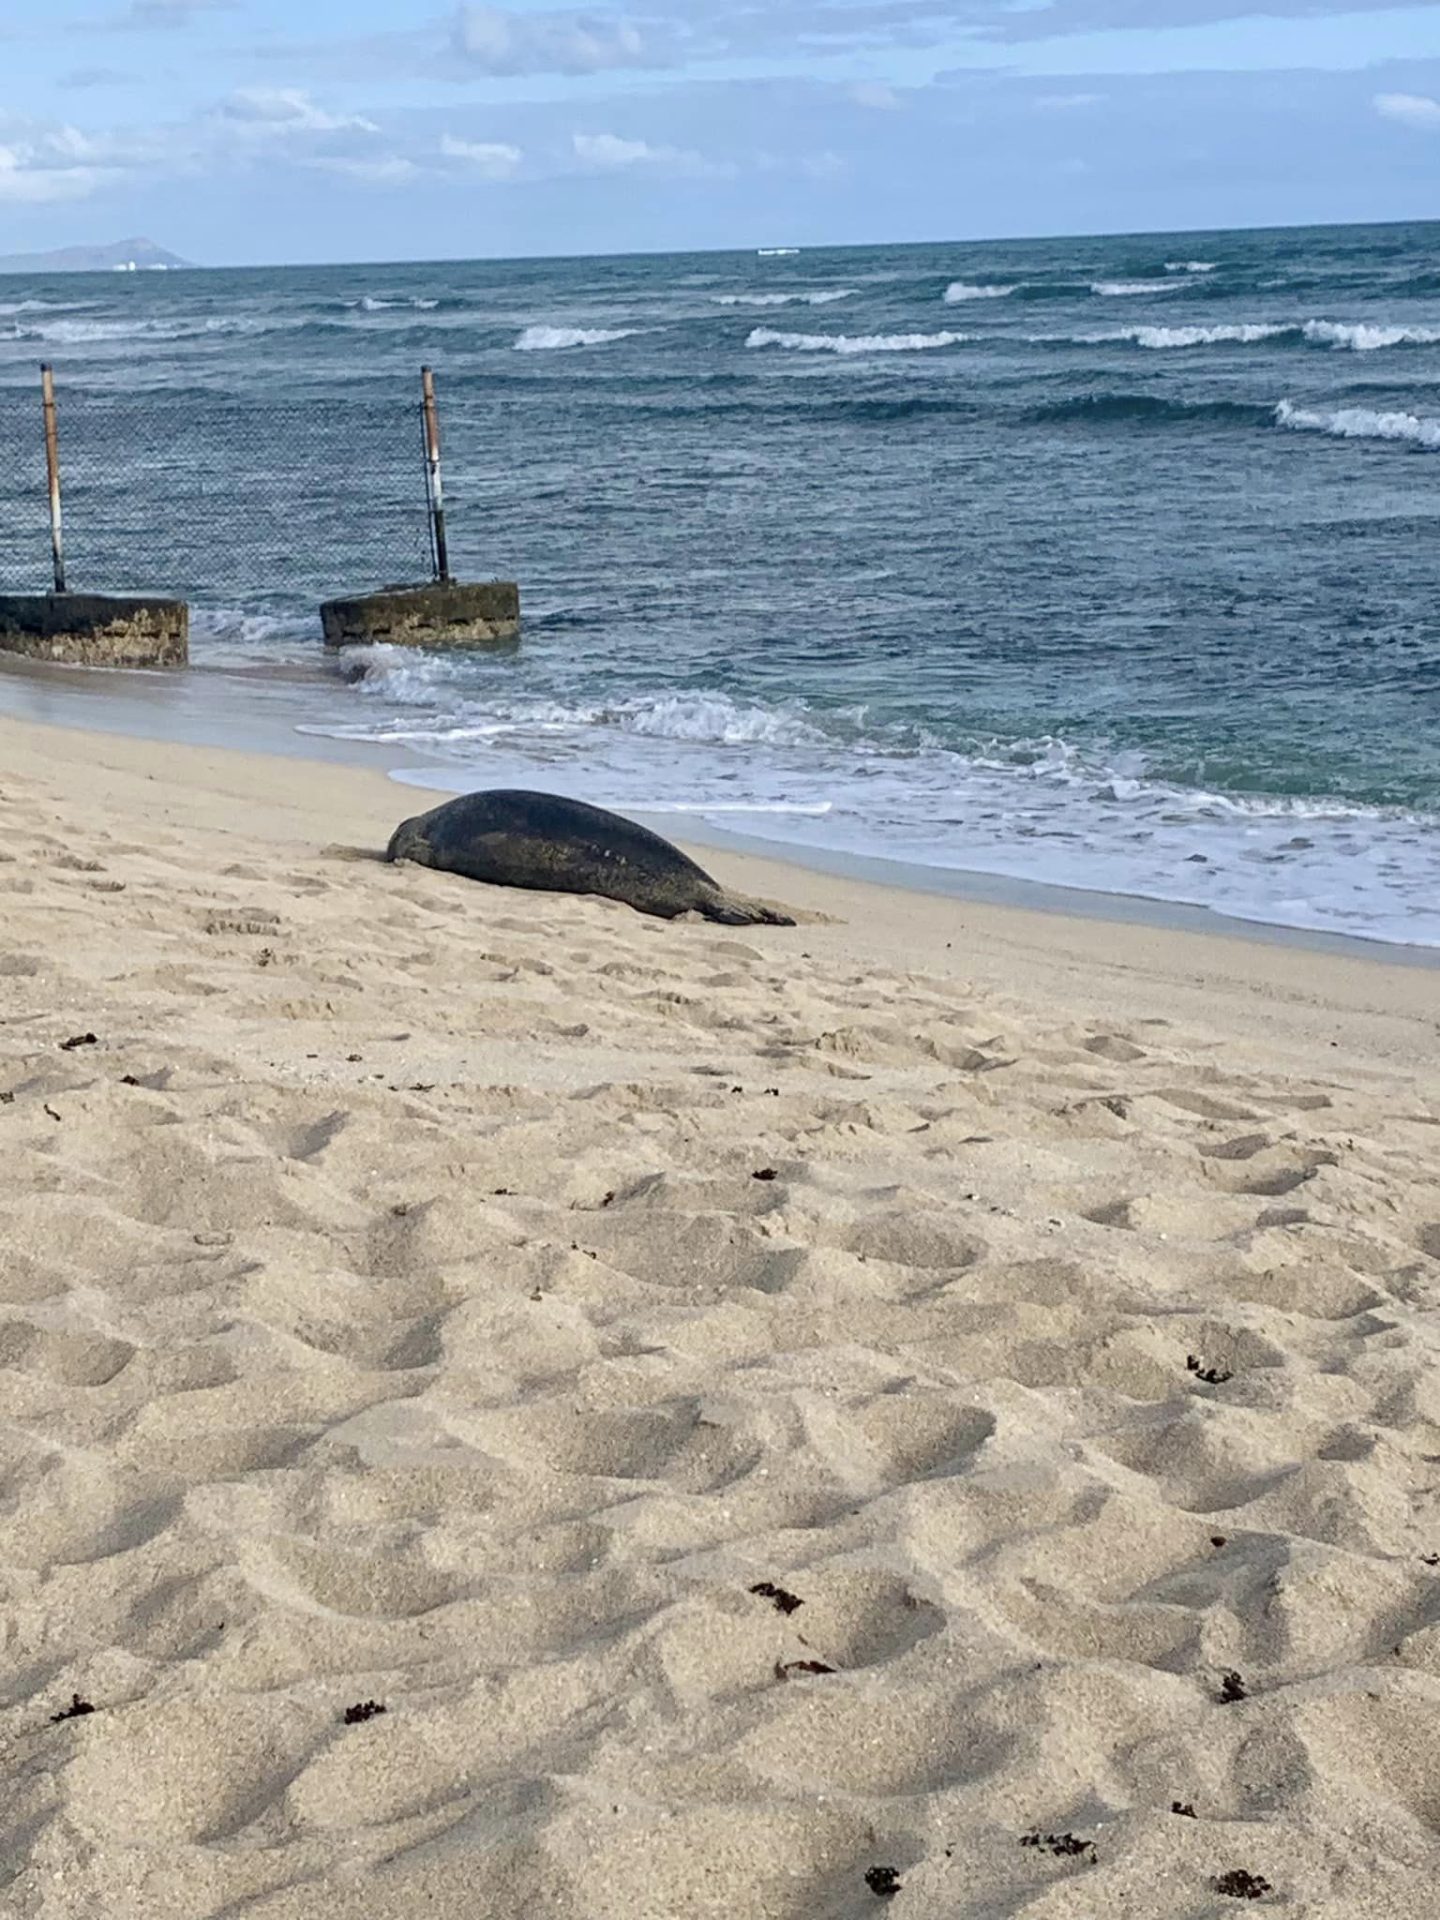 Hawaii Bucket List: Hang out with a monk seal on the beach.